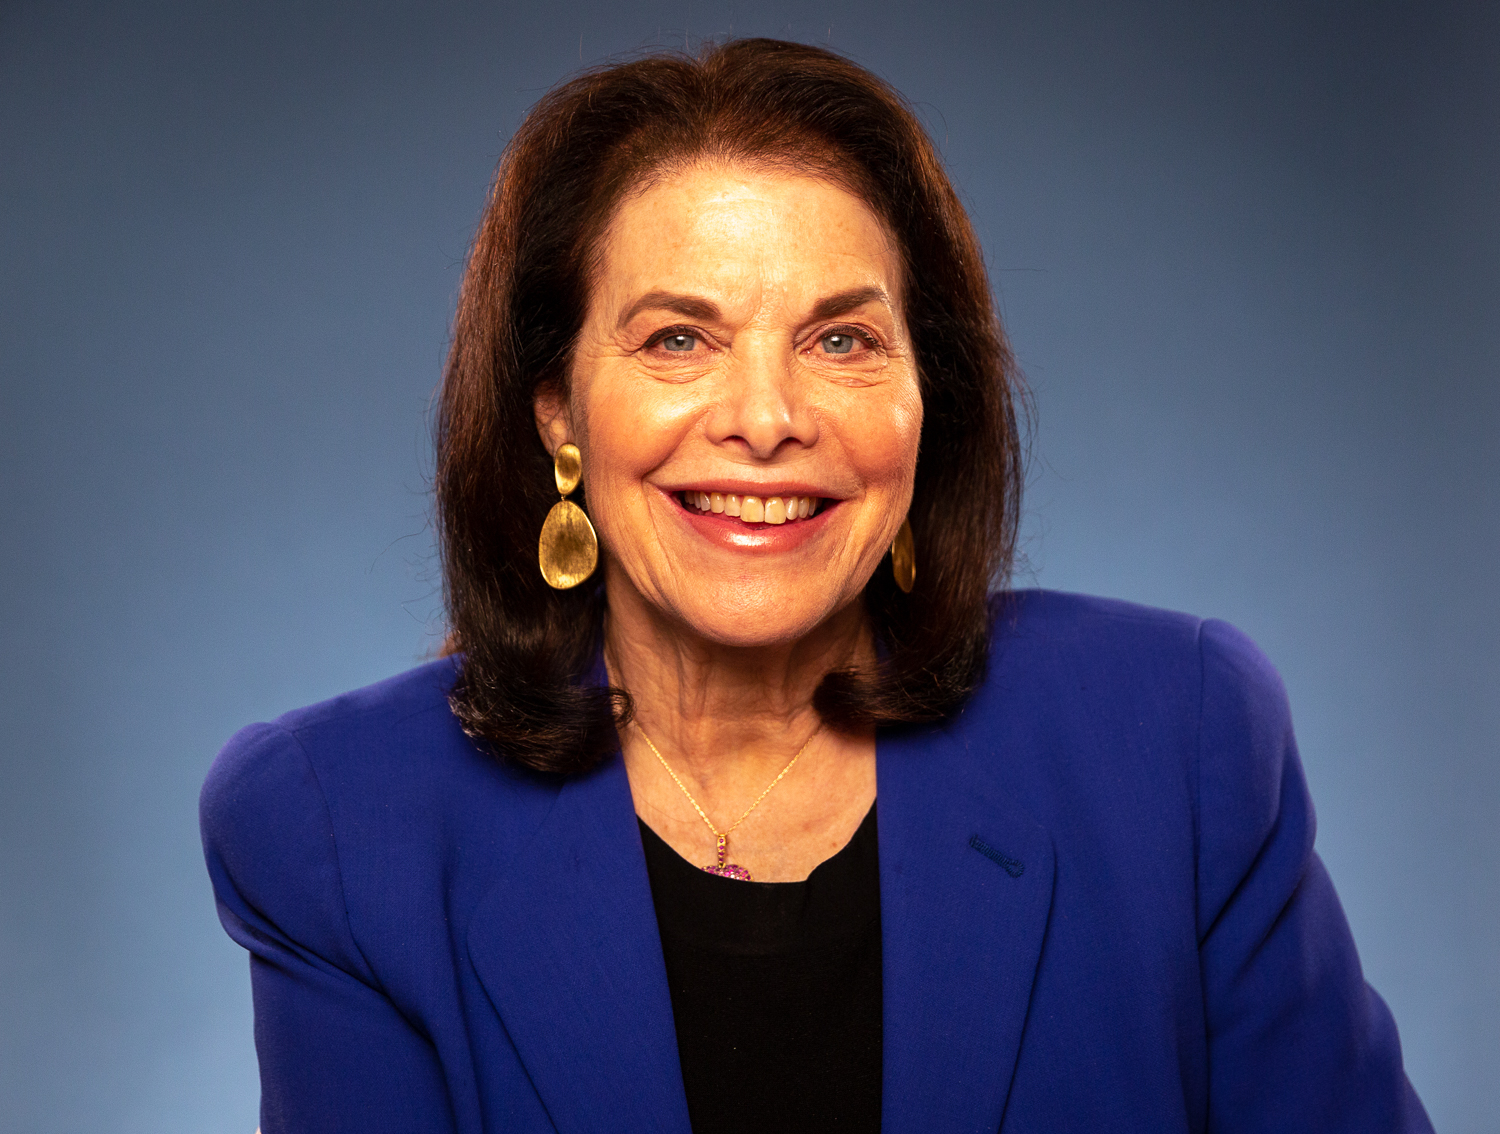 EnCorps STEM Teachers Program Founder and former Paramount Pictures CEO Sherry Lansing.